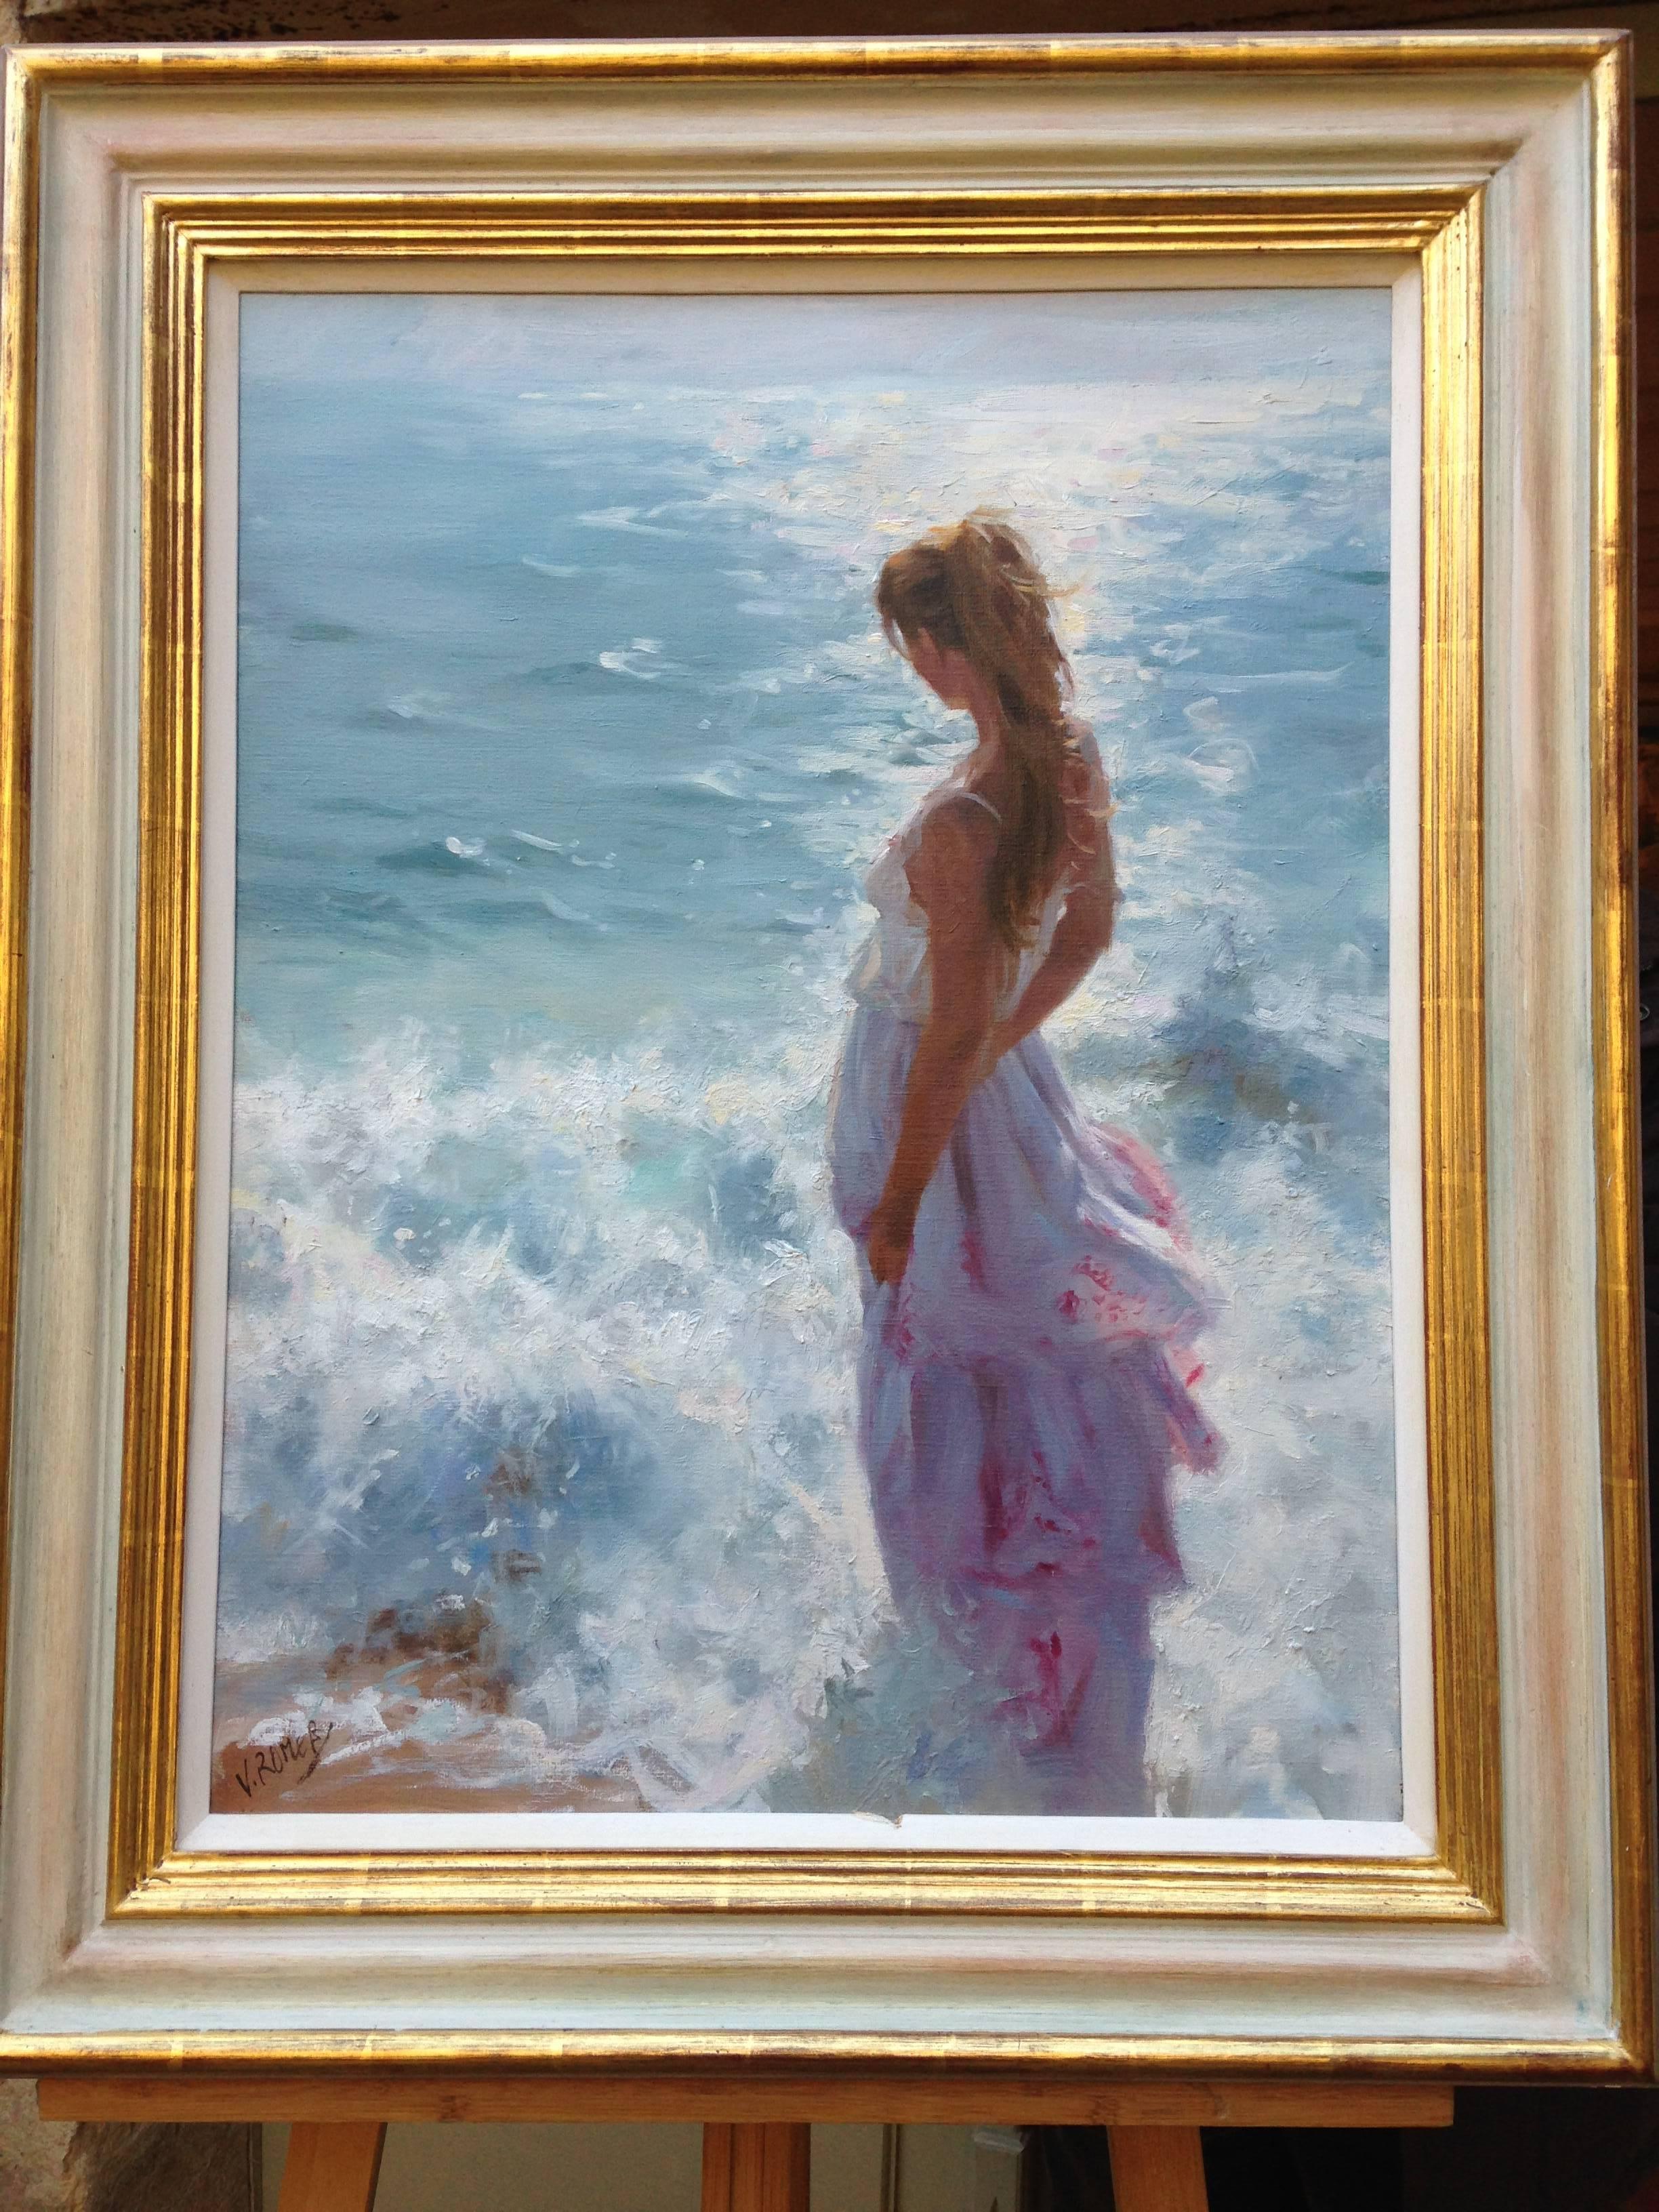 At the Edge of the Sea - Painting by Vicente Romero